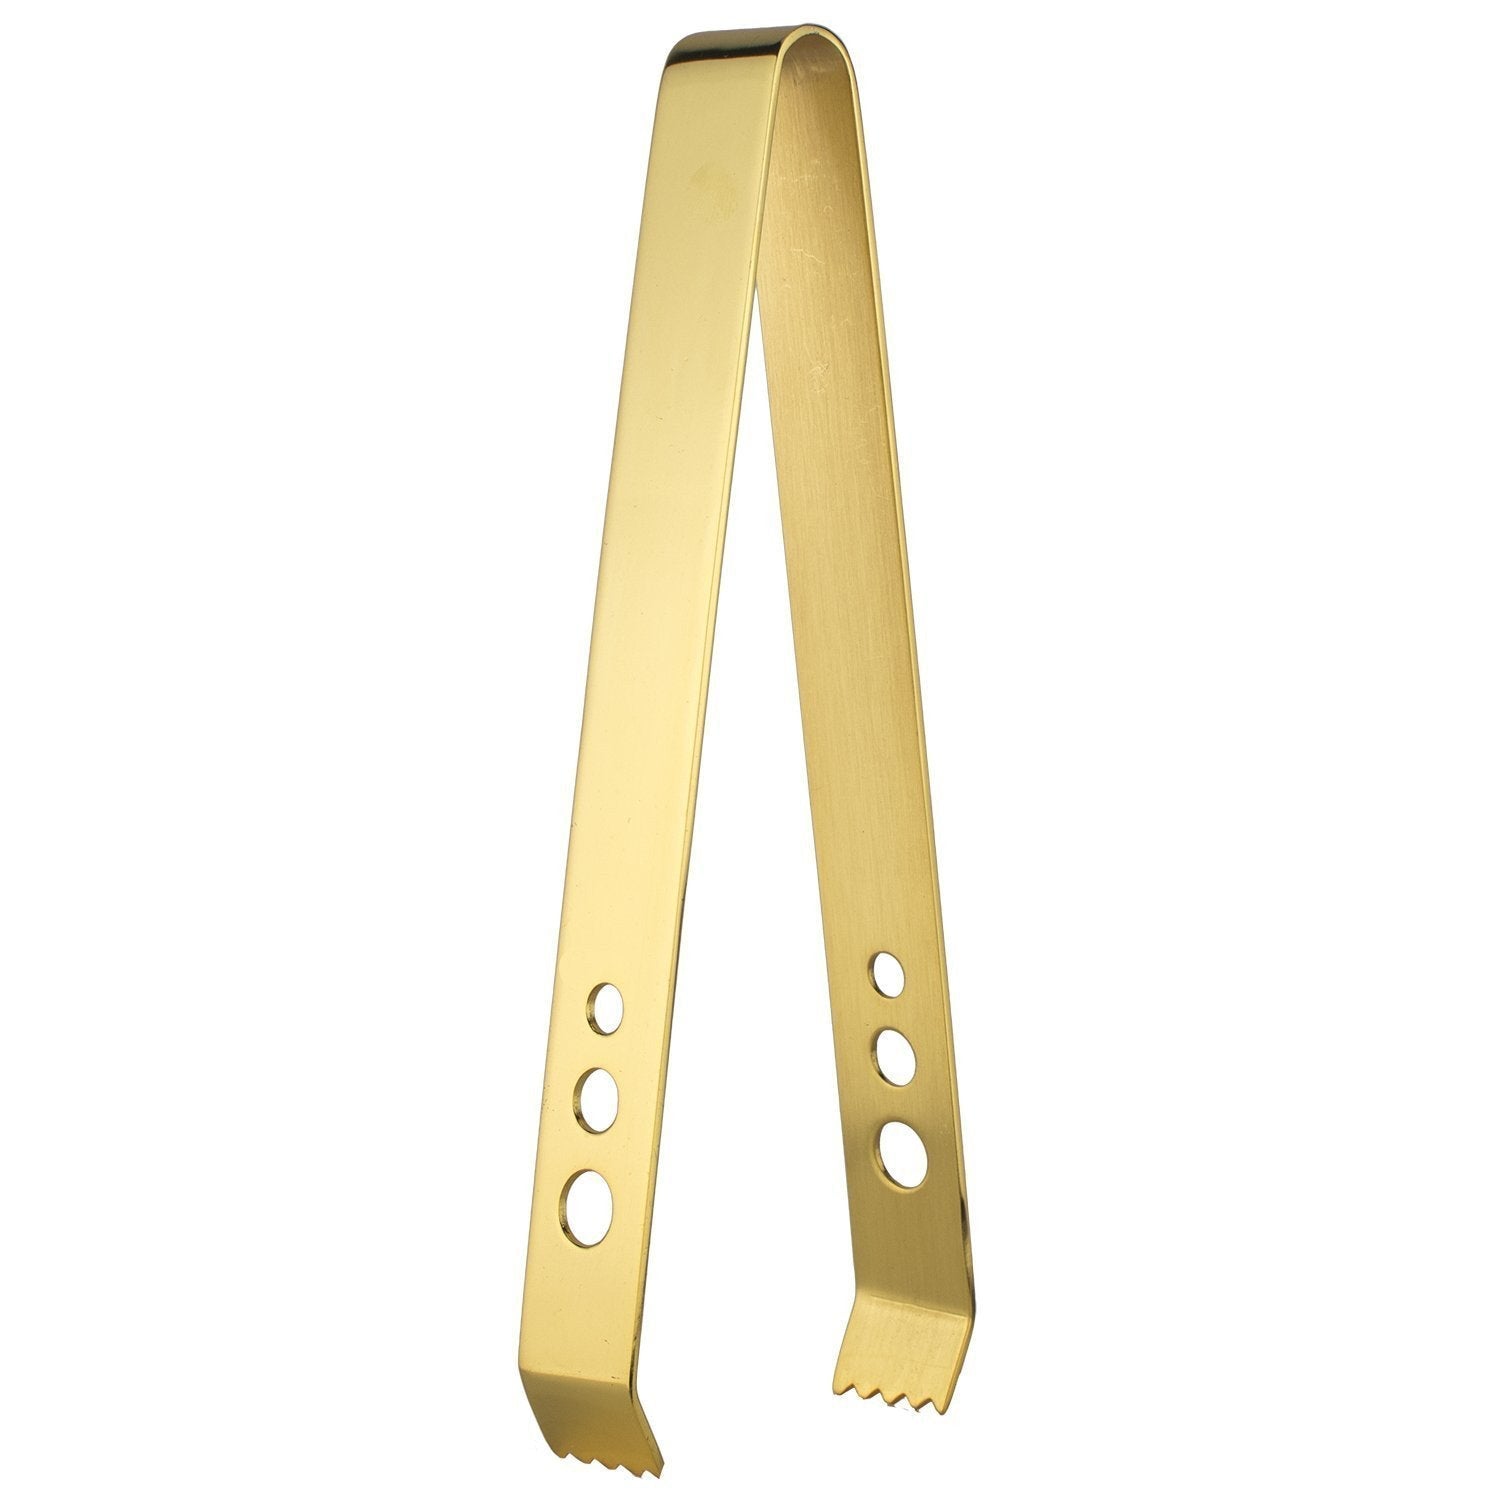 Prince of Scots 24K Gold-Plate 7 Inch Professional Series Ice Tongs-Barware-Prince of Scots-810032751616-BarIceTongG-Prince of Scots